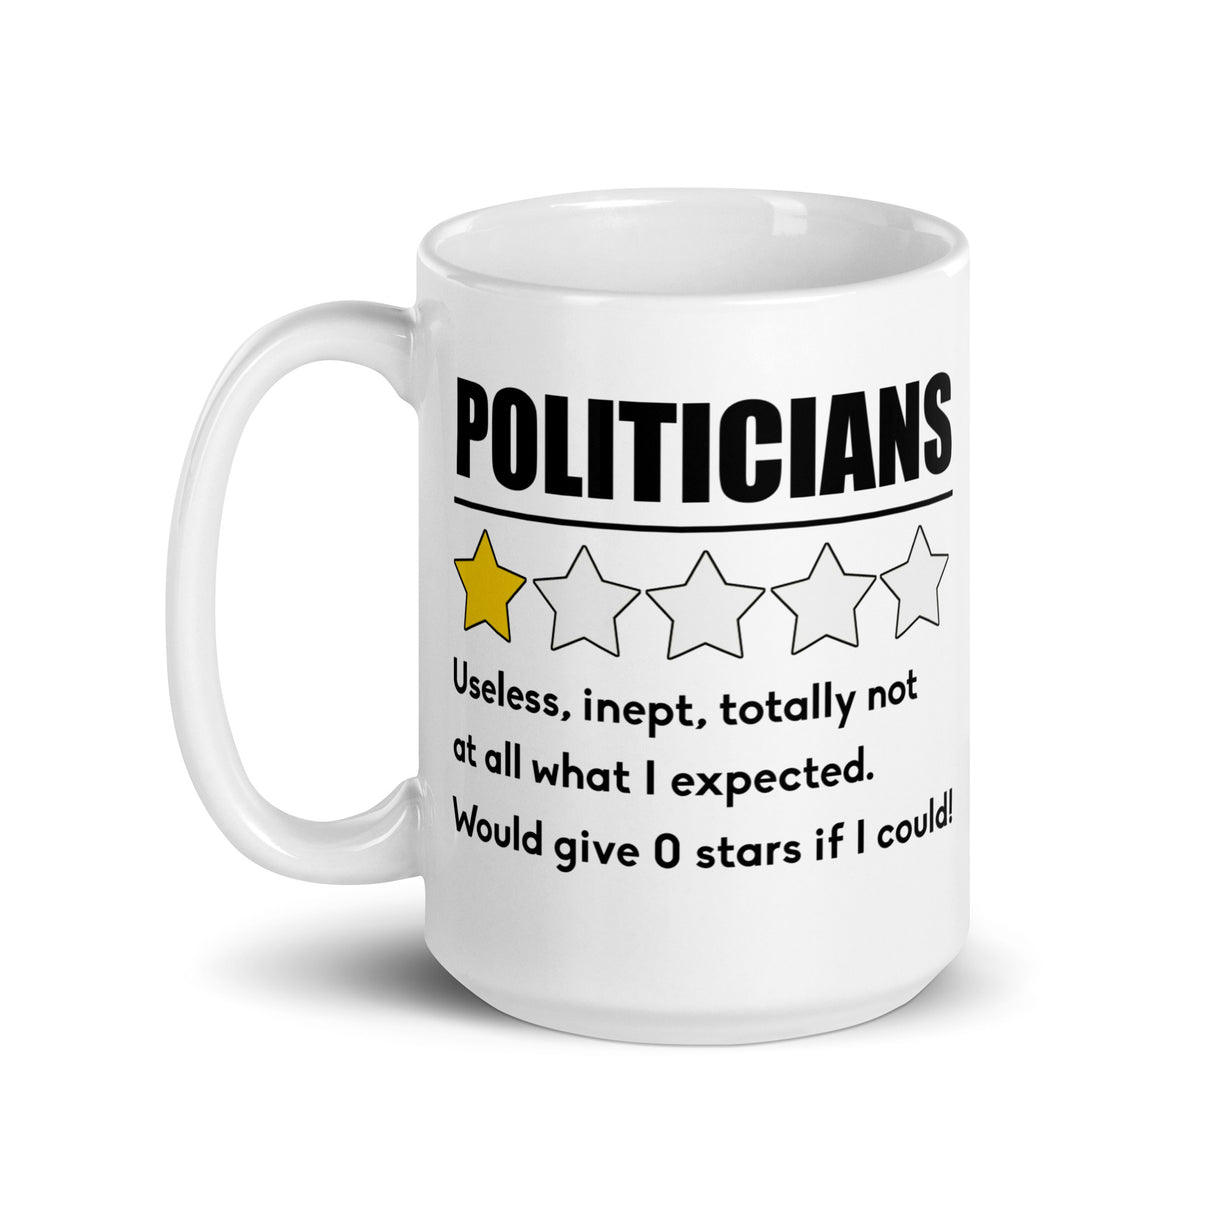 Politicians Very Bad Would Not Recommend Coffee Mug - Libertarian Country